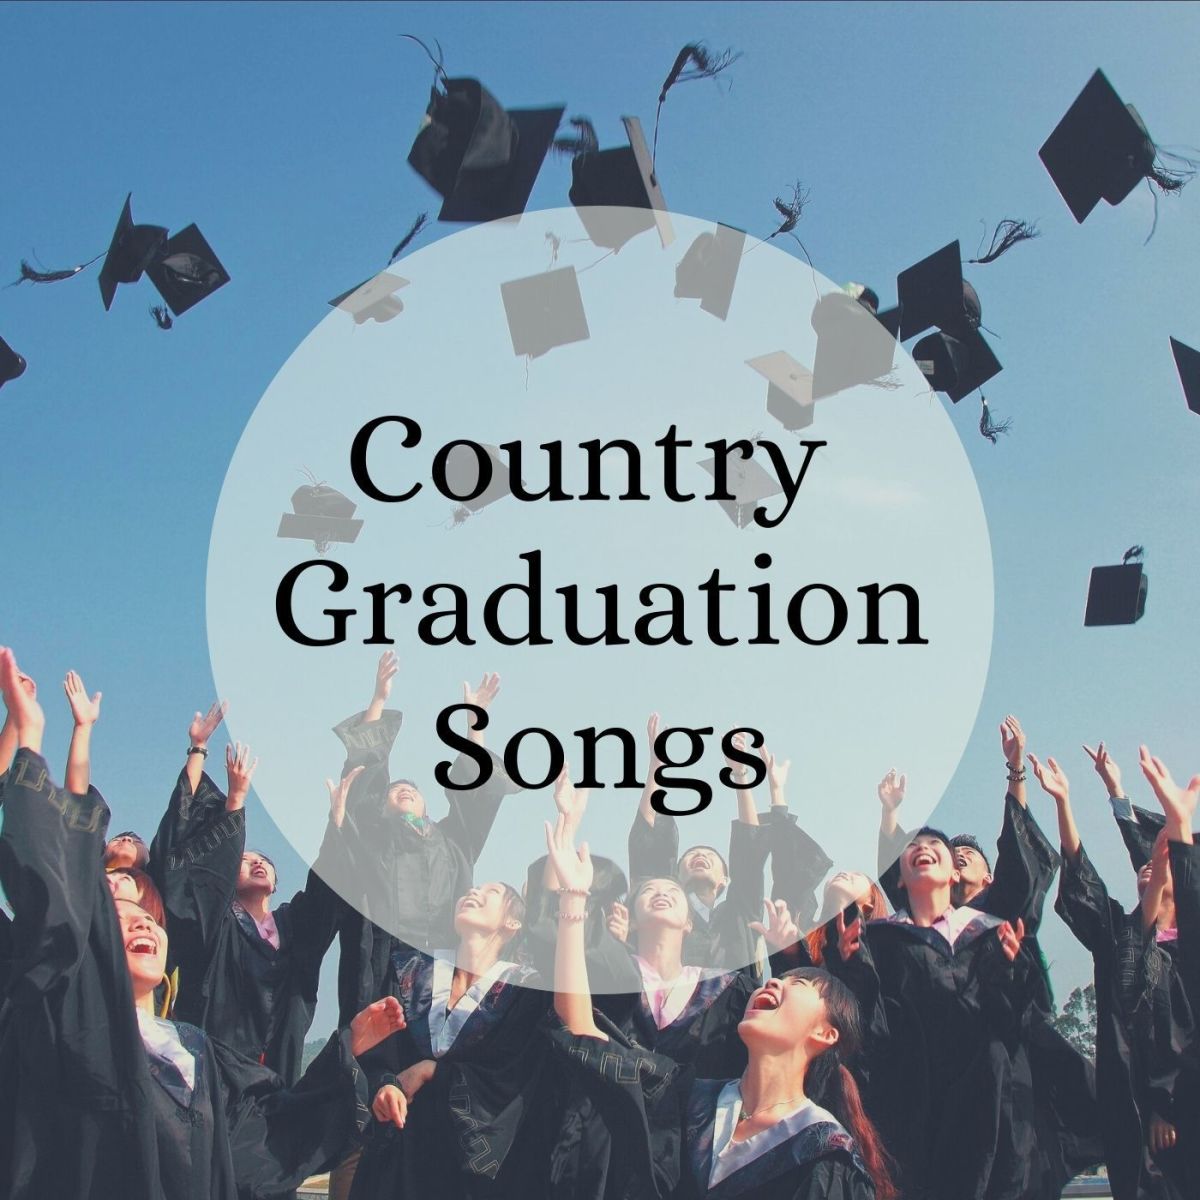 Nine Country Songs for Graduation